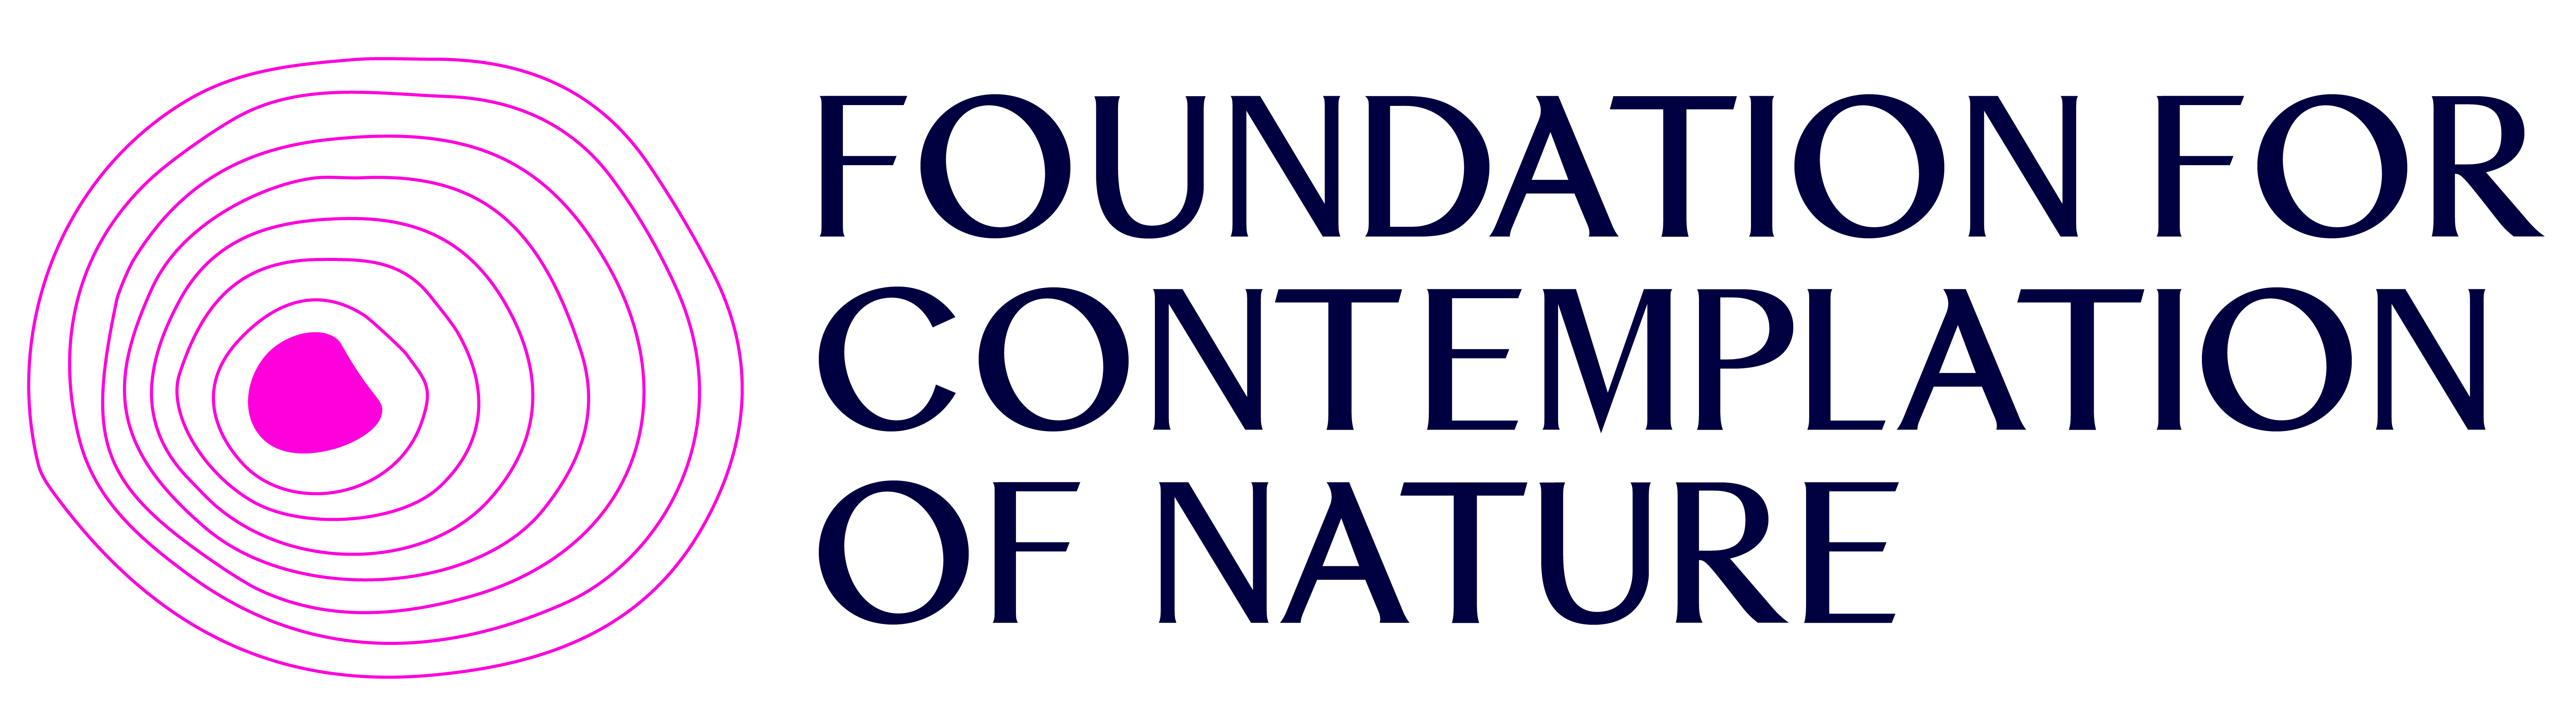 The Foundation for Contemplation of Nature